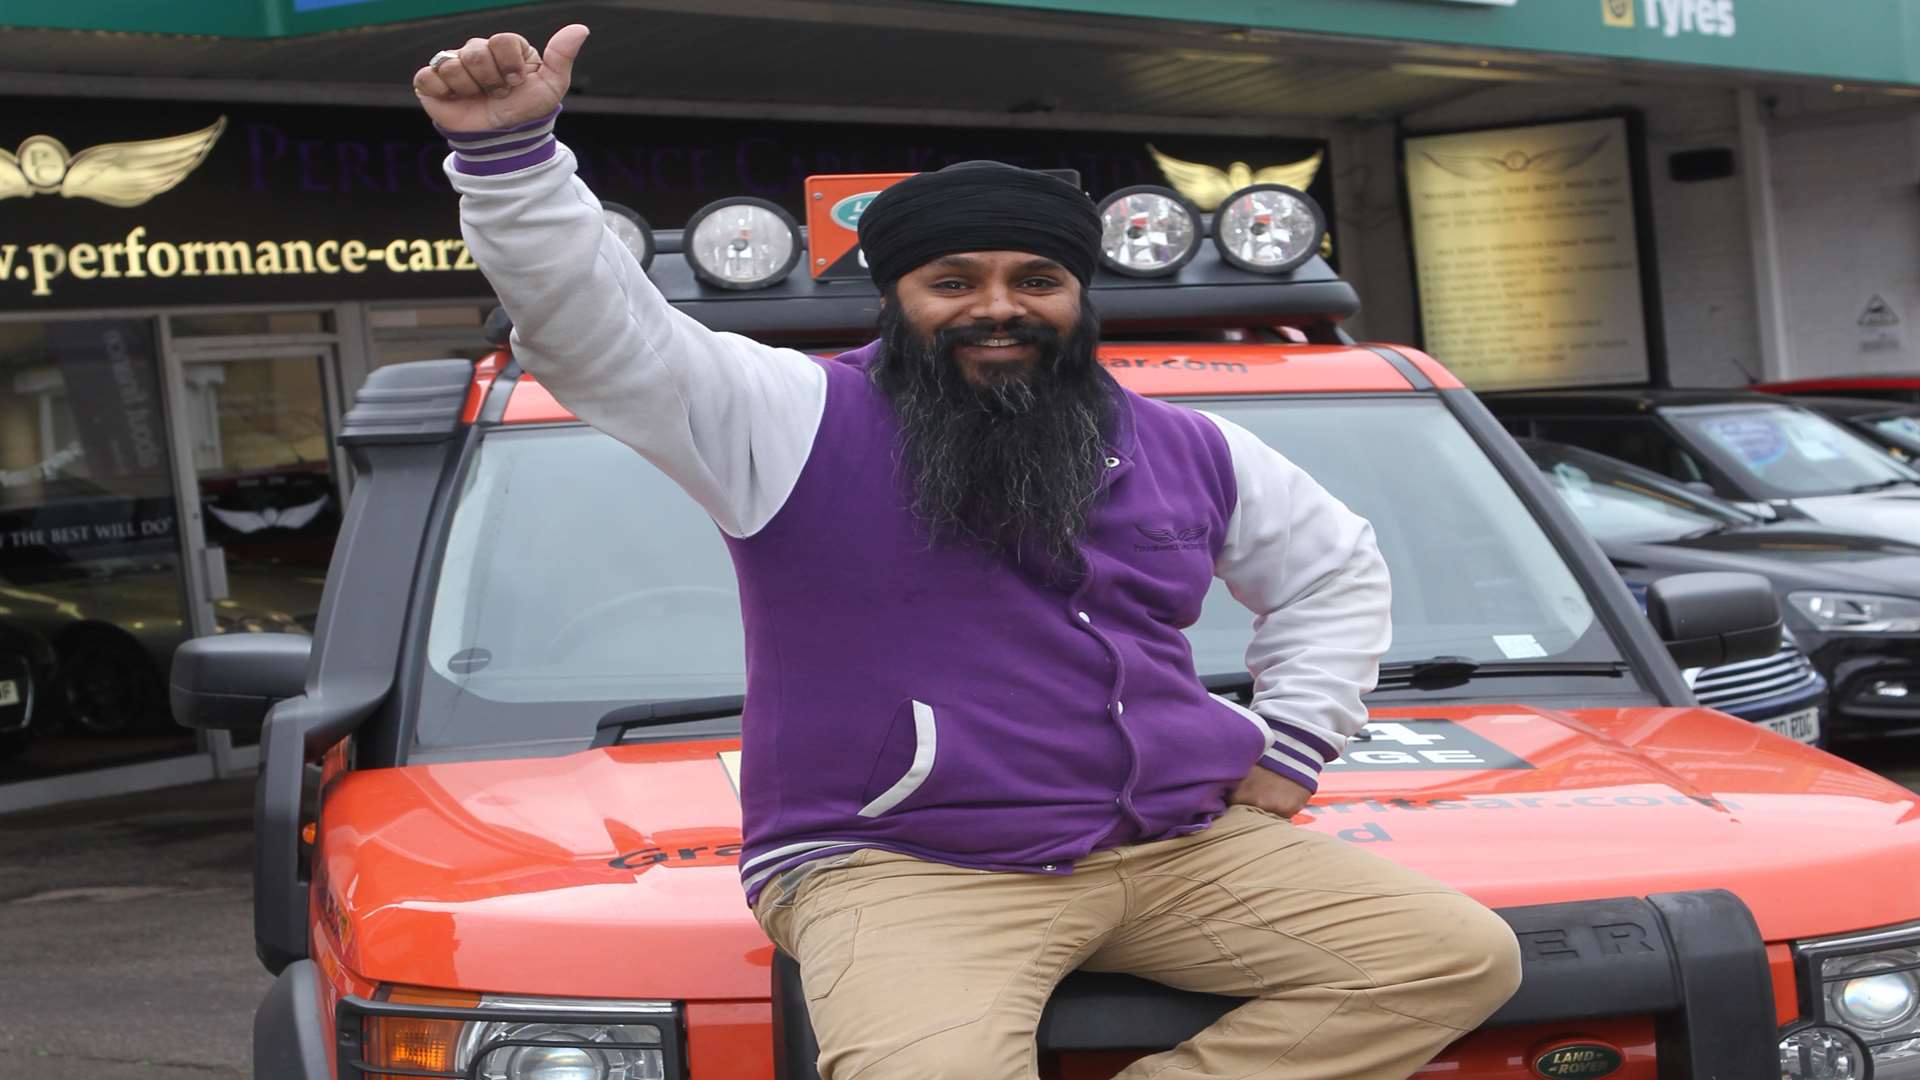 Jagjit Singh Grewal with his Landrover Discovery that he and a friend drove from the Guru Nanak Dabar in Gravesend to Amritsar in India